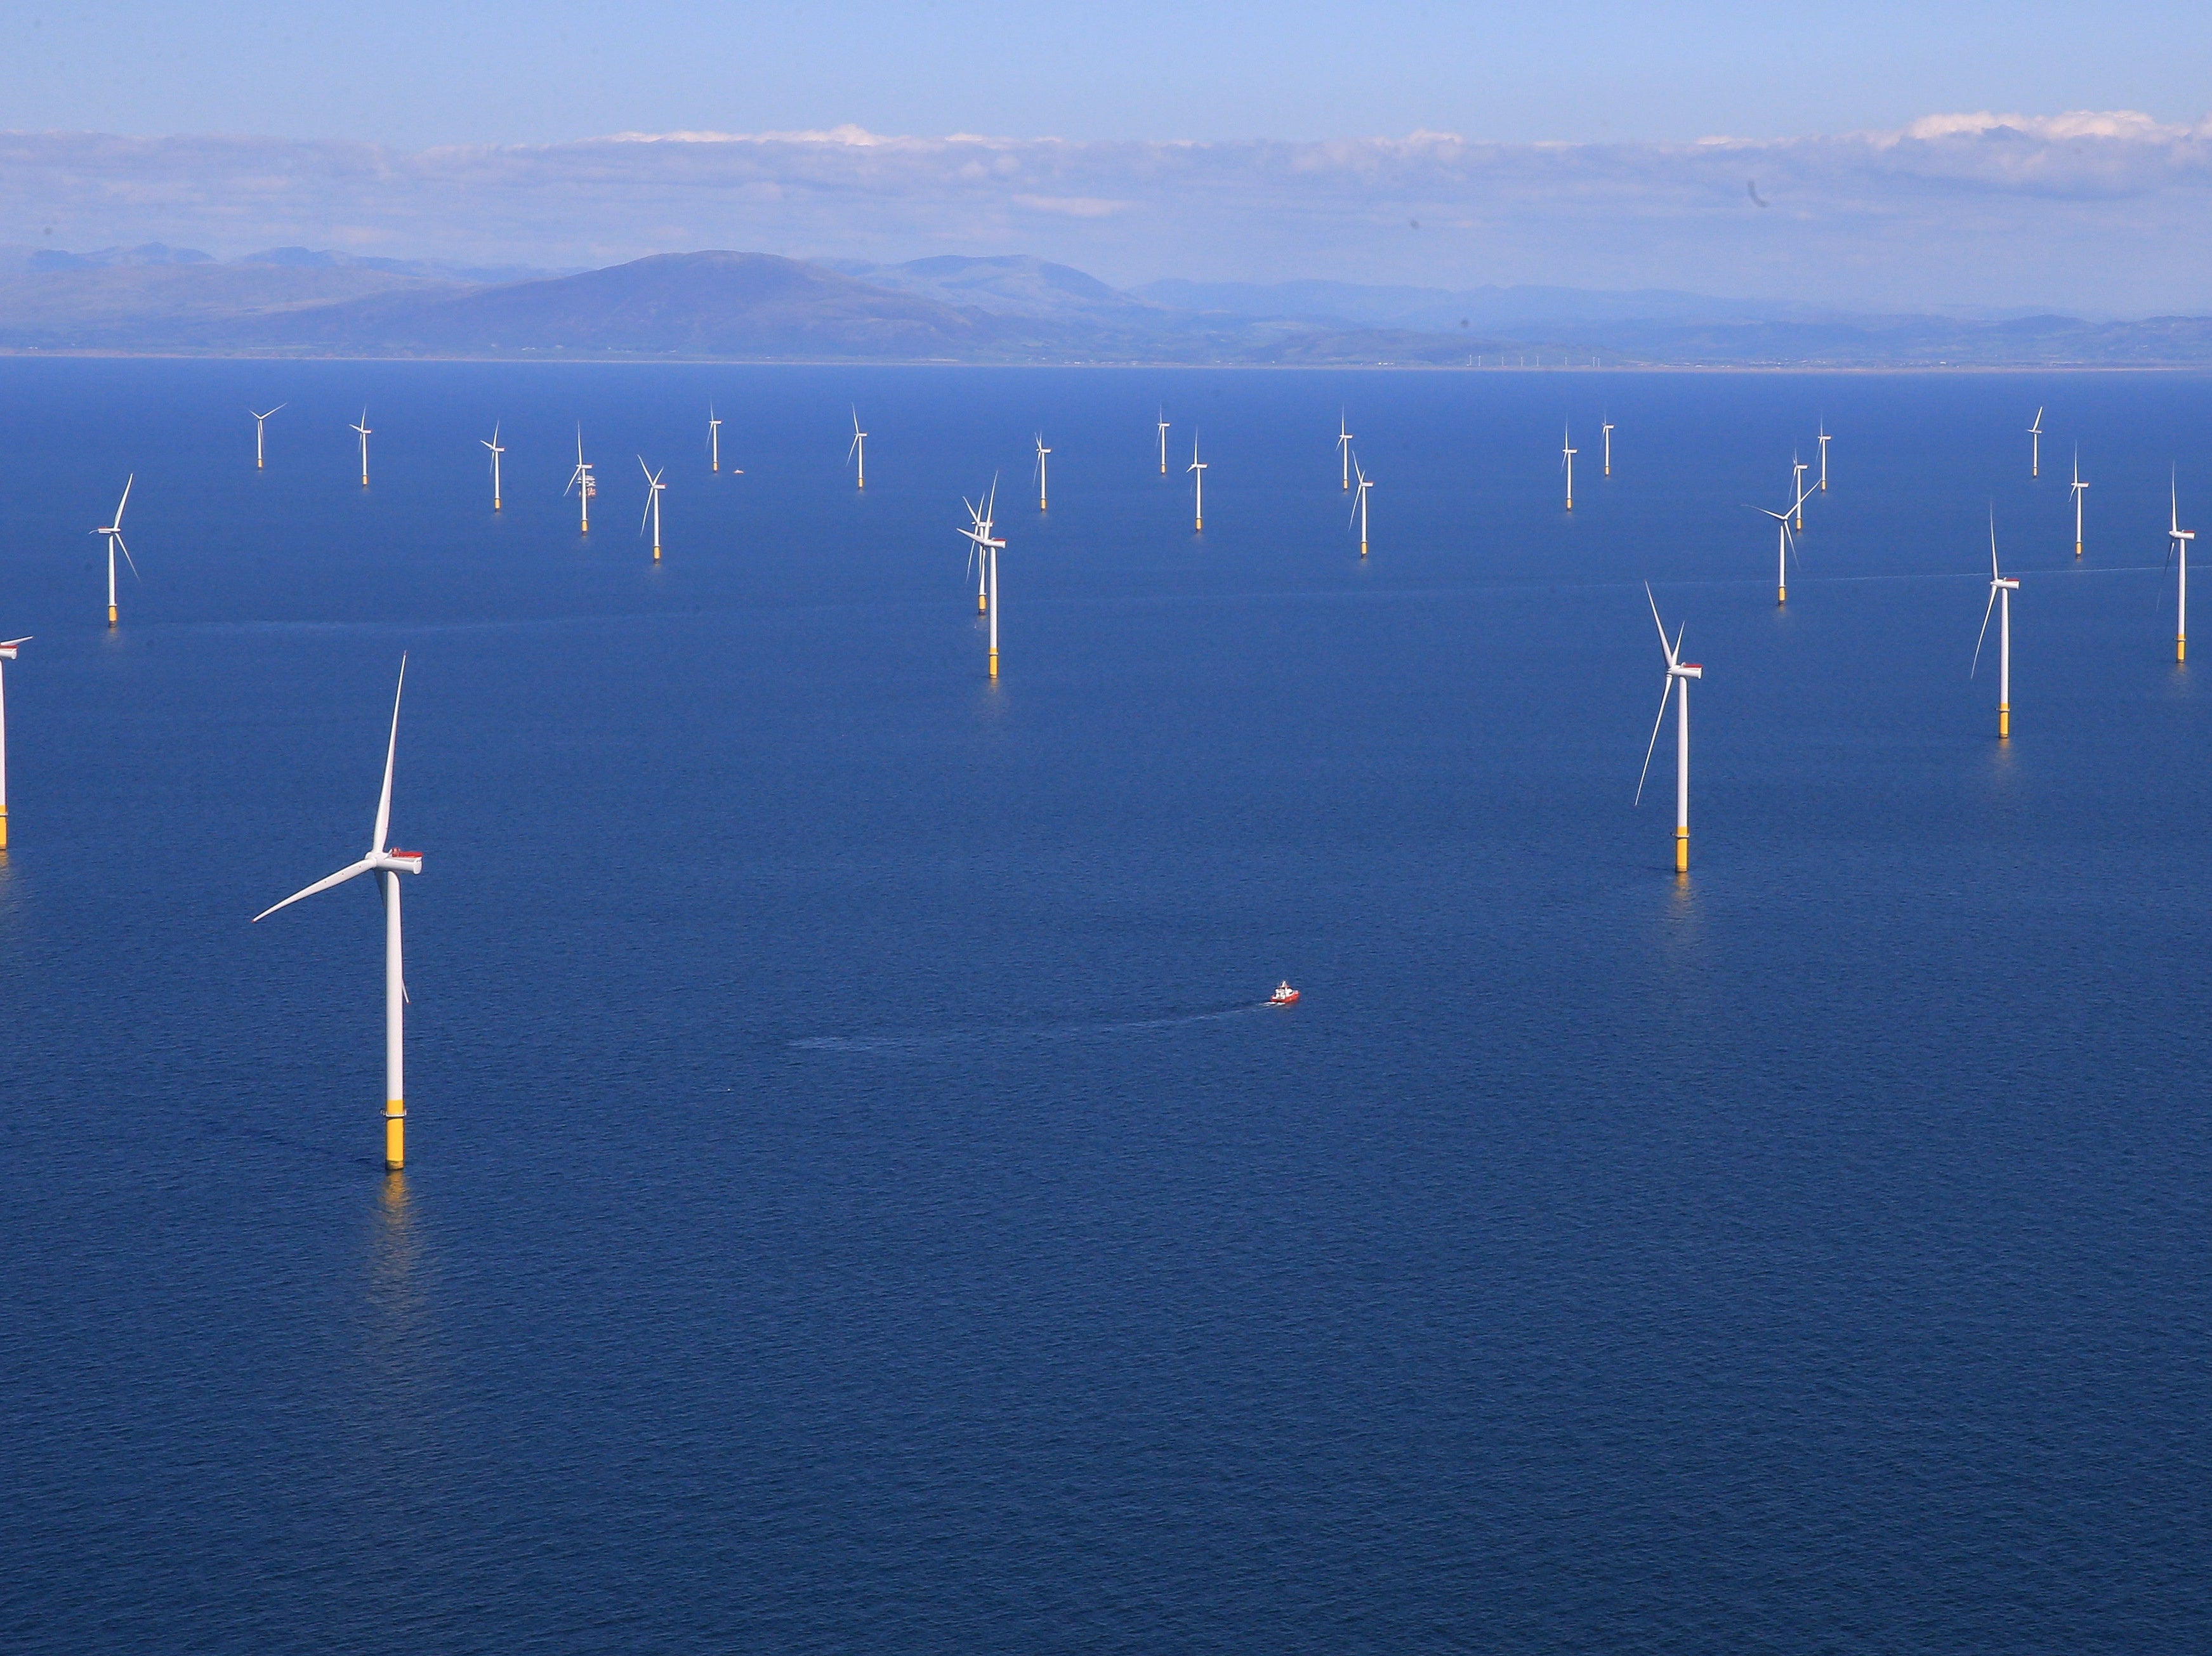 Shipyards could be retrofitted to enable the rapid construction of offshore wind farms